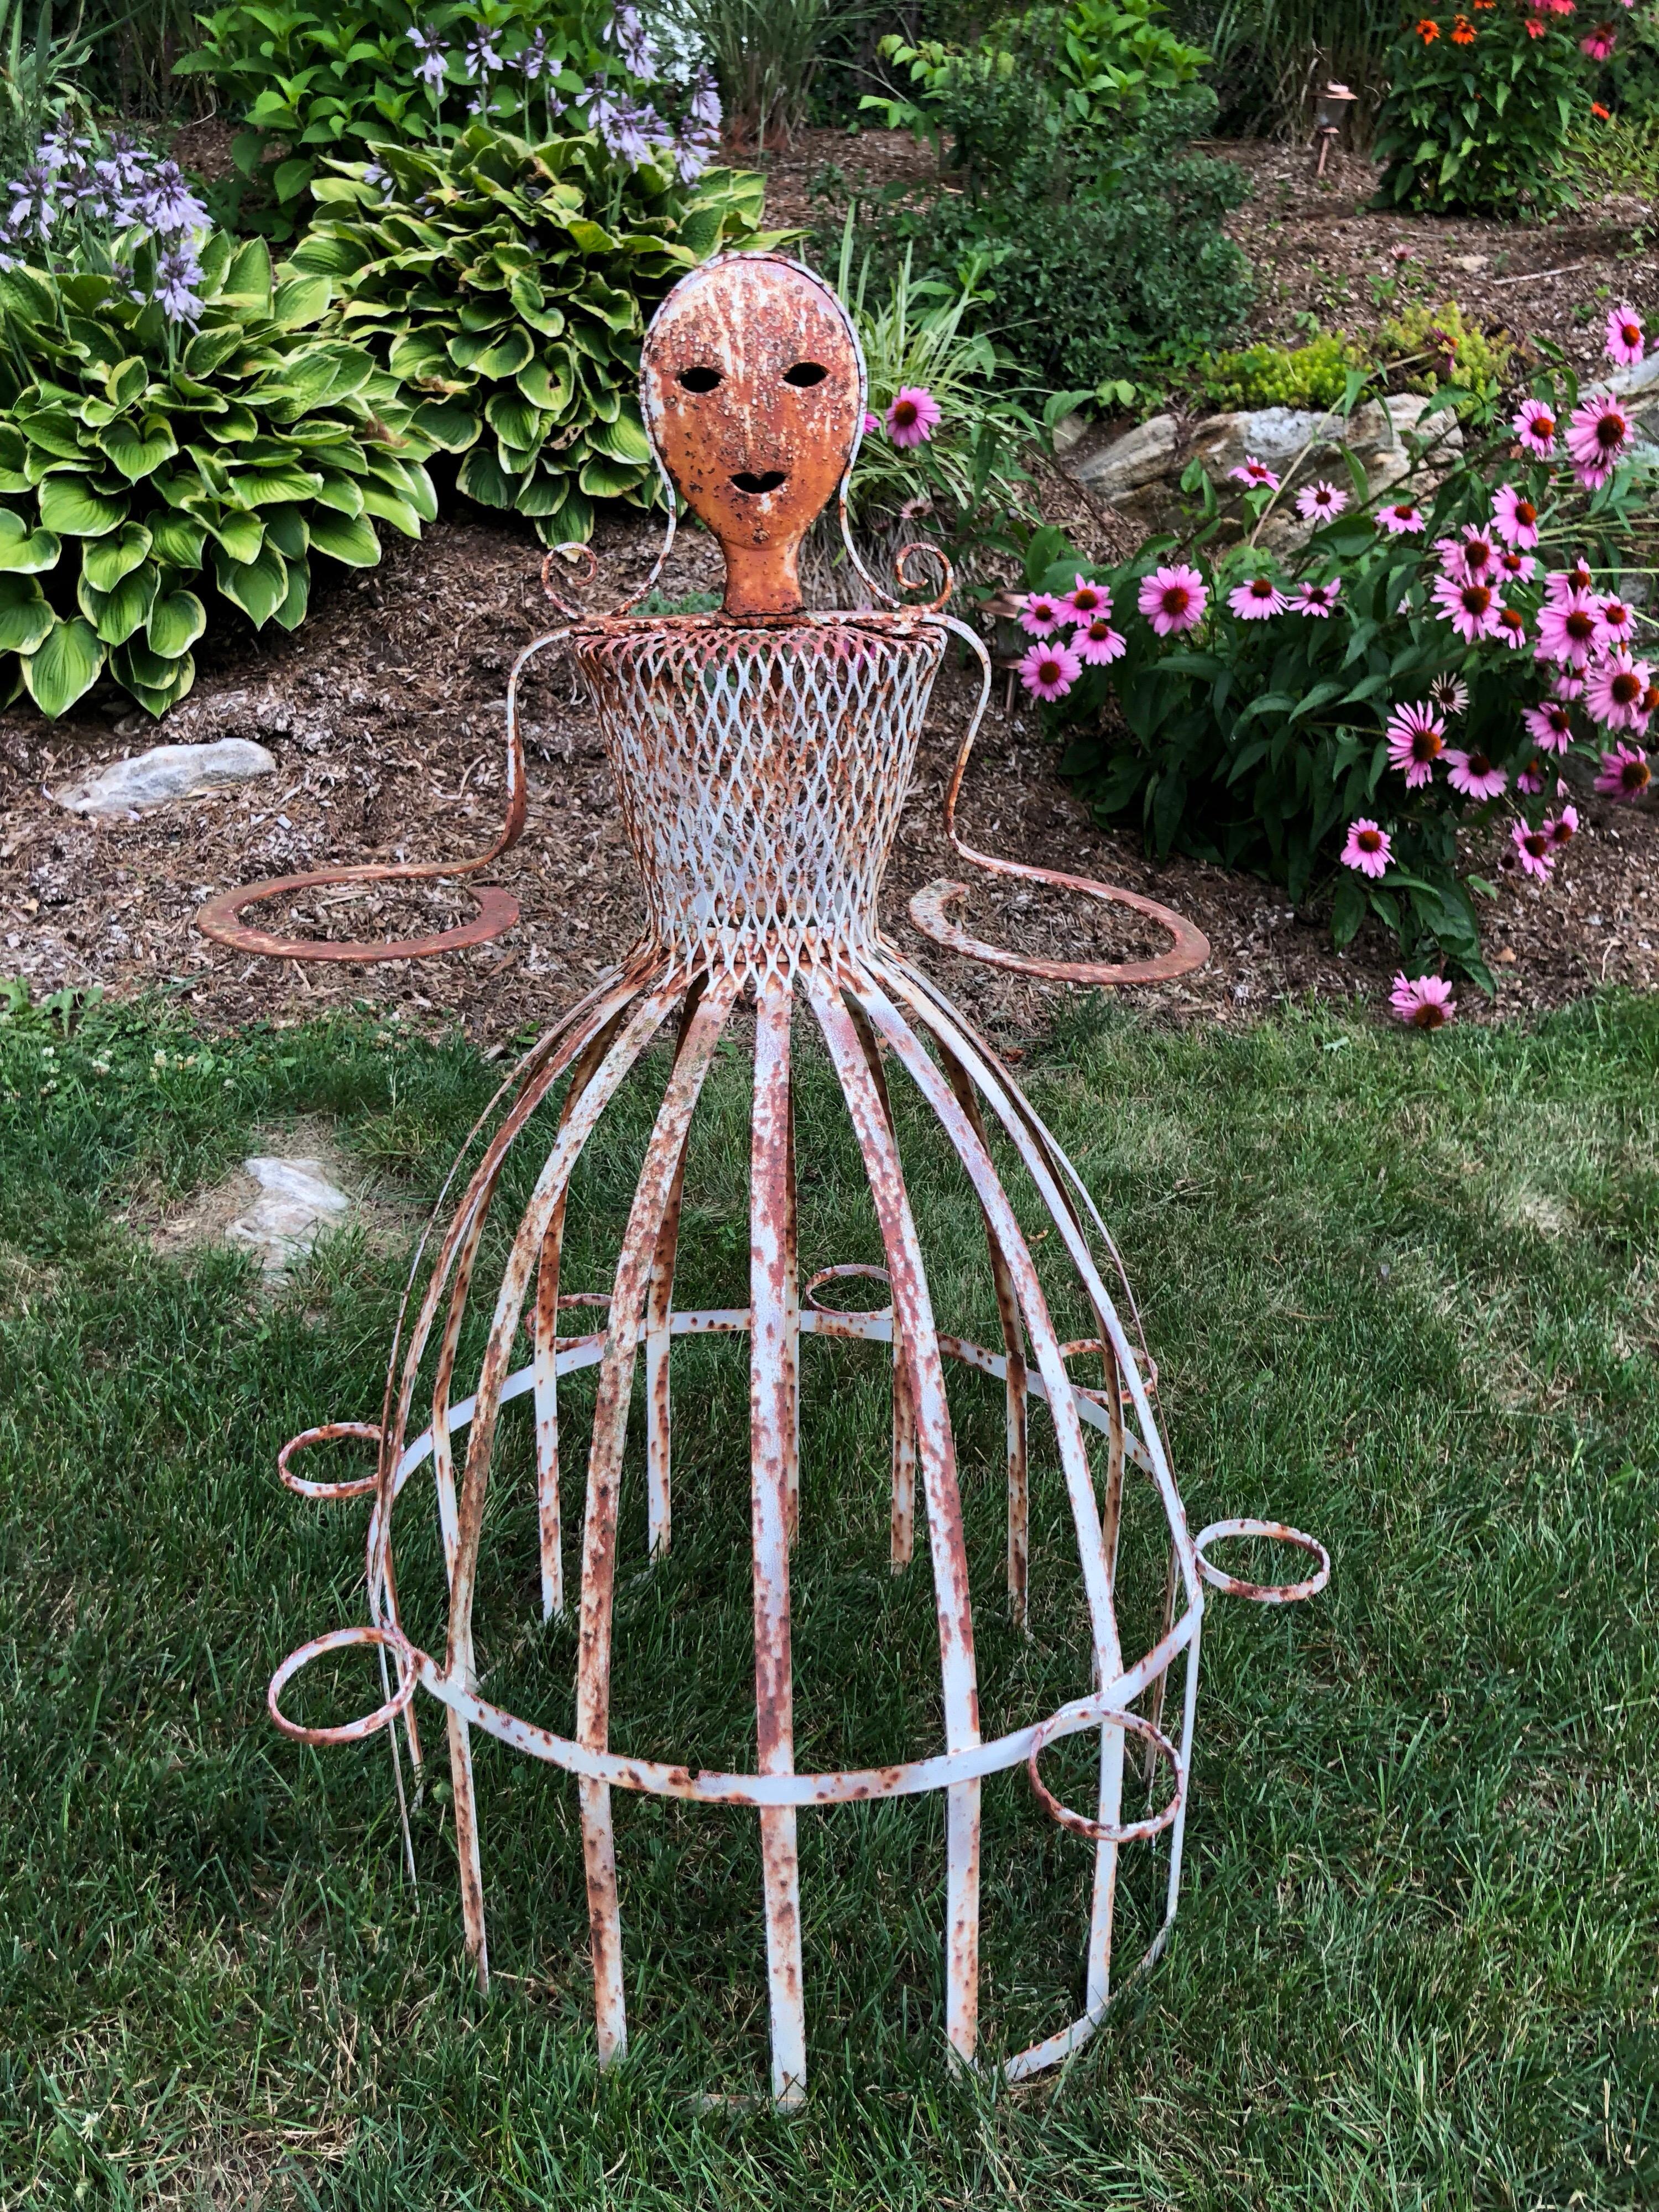 French garden planter in the shape of a Maiden. Attributed to Colette Guerdon. Iron whimsical garden ornament.
Can be repainted if desired or leave rustic and distressed. Has circular pot holders around her hands as well as the rim of her dress to